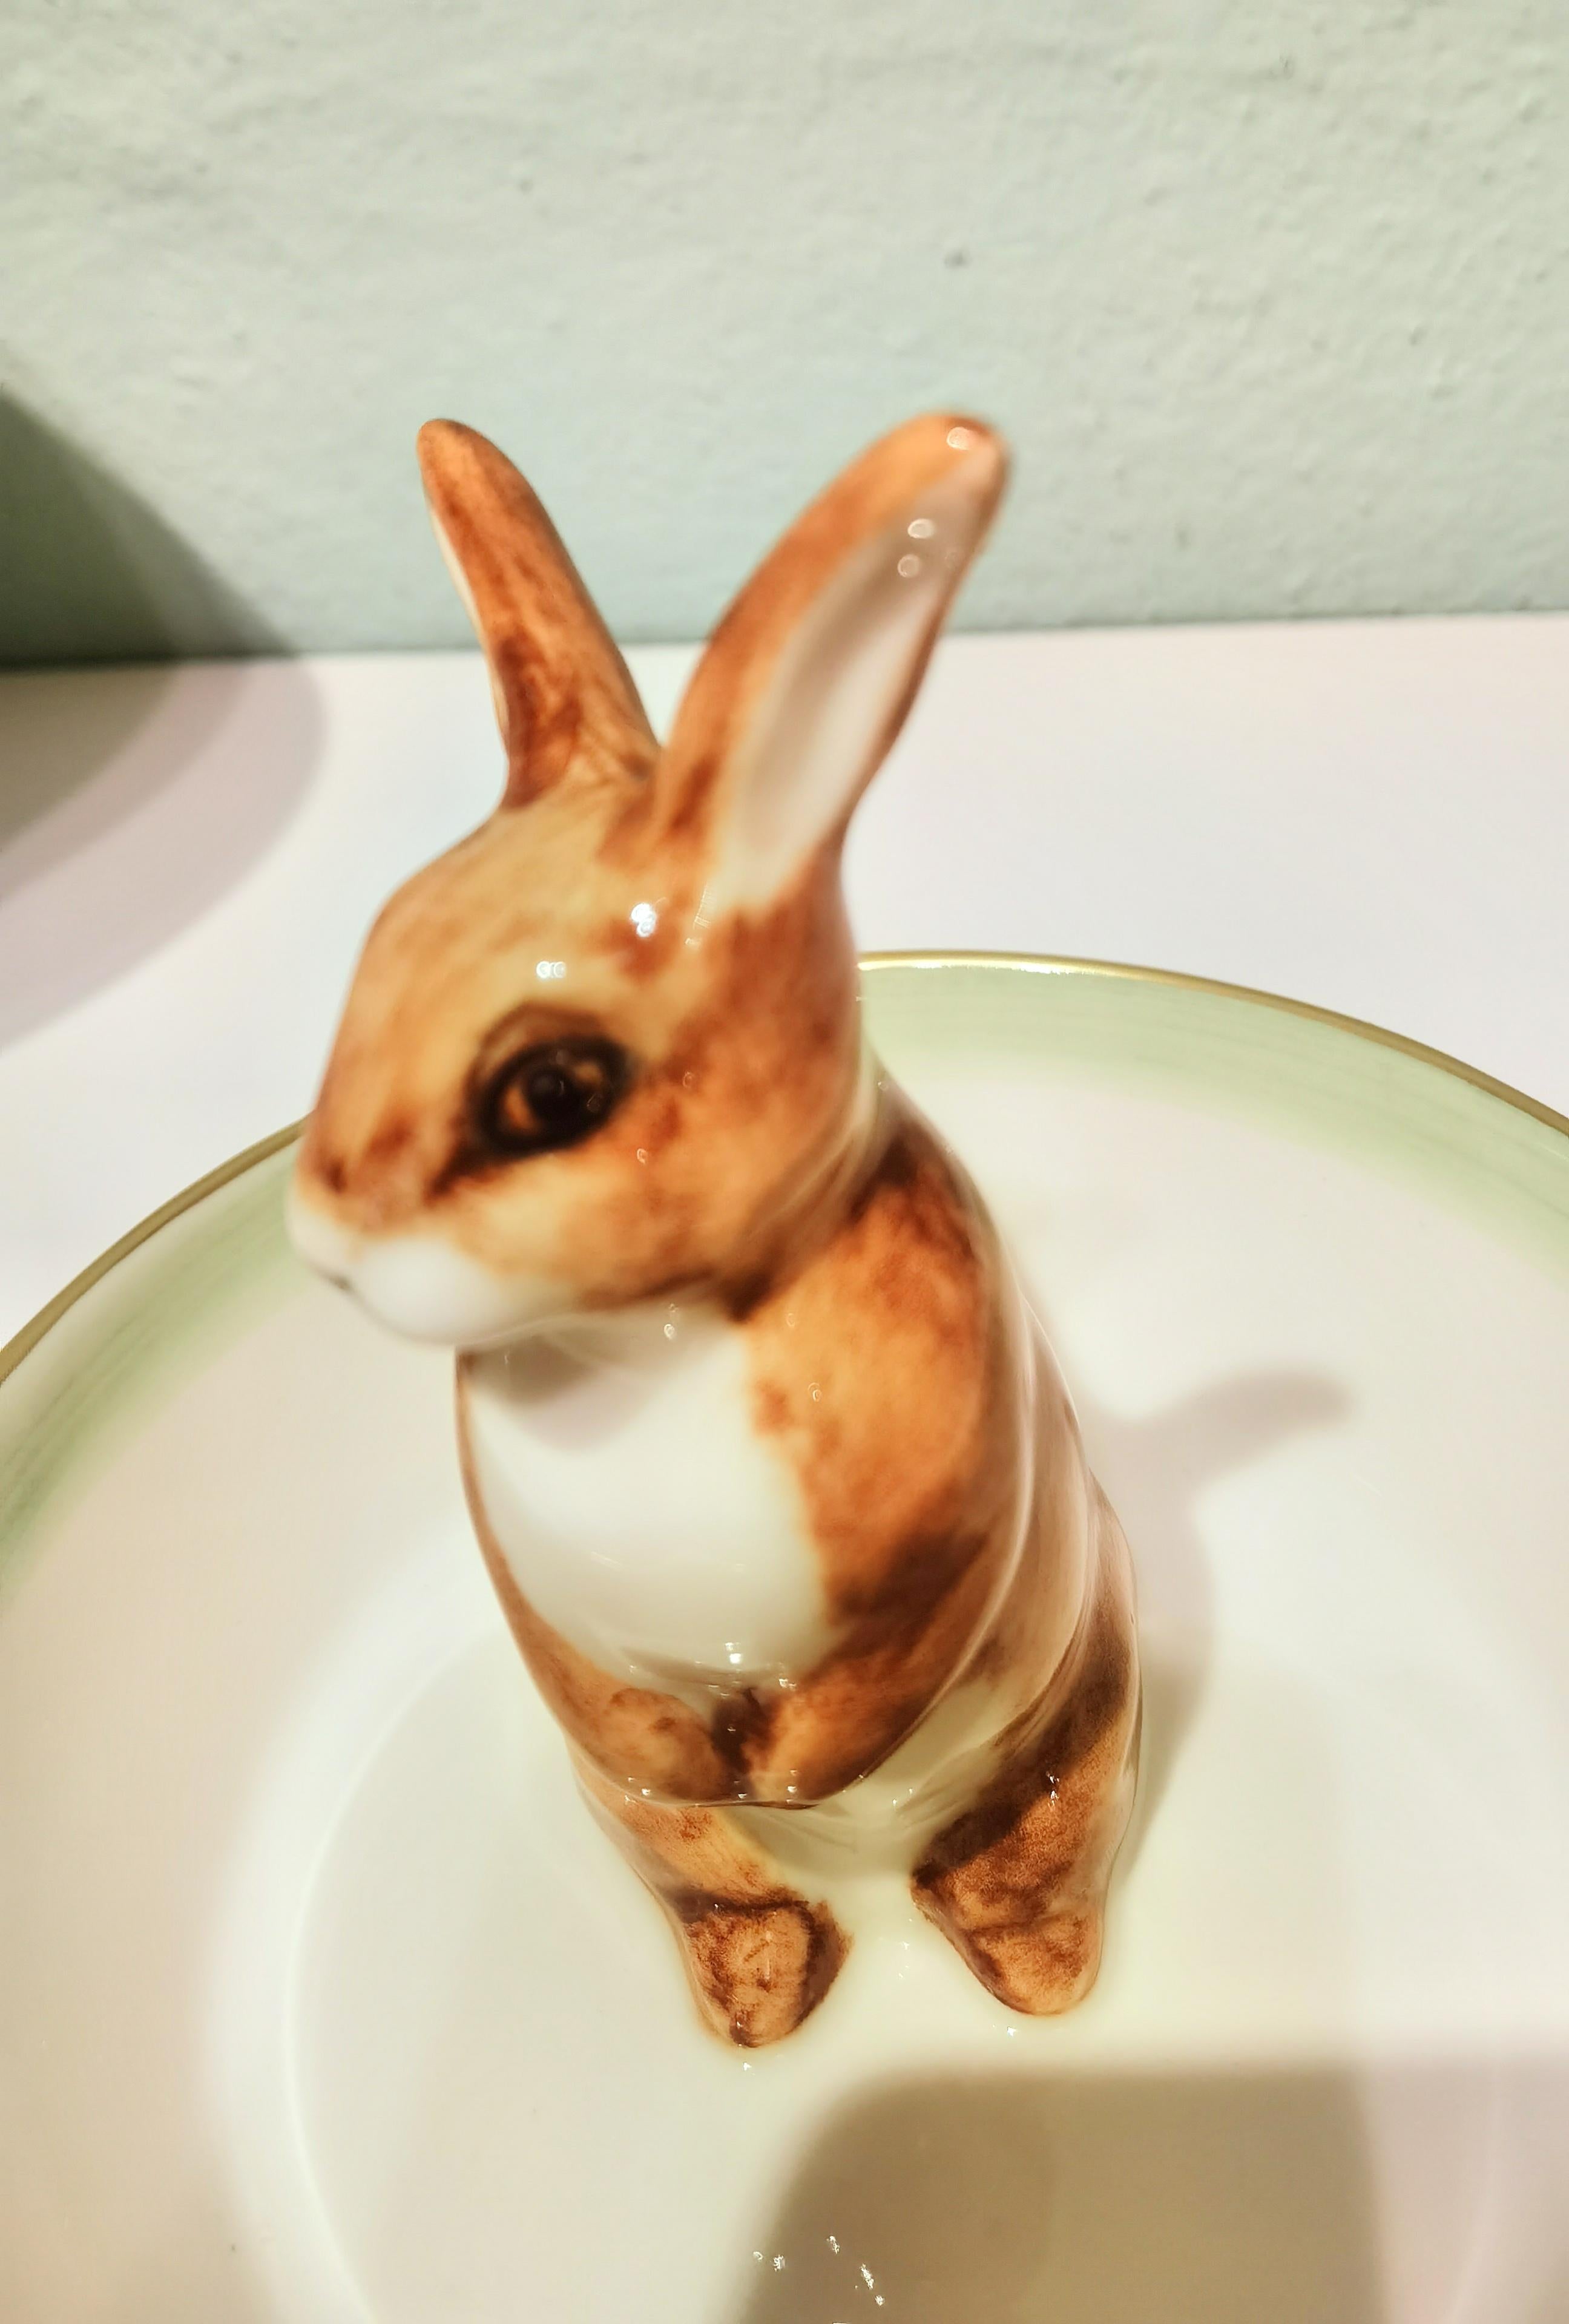 These completely handmade porcelain pastry dish is hands-free painted with a brown and white painted rabbit sitting in the middle of the dish. Rimmed by hand with a green and fine 24 carat gold line. Handmade in Bavaria / Germany.
About Sofina